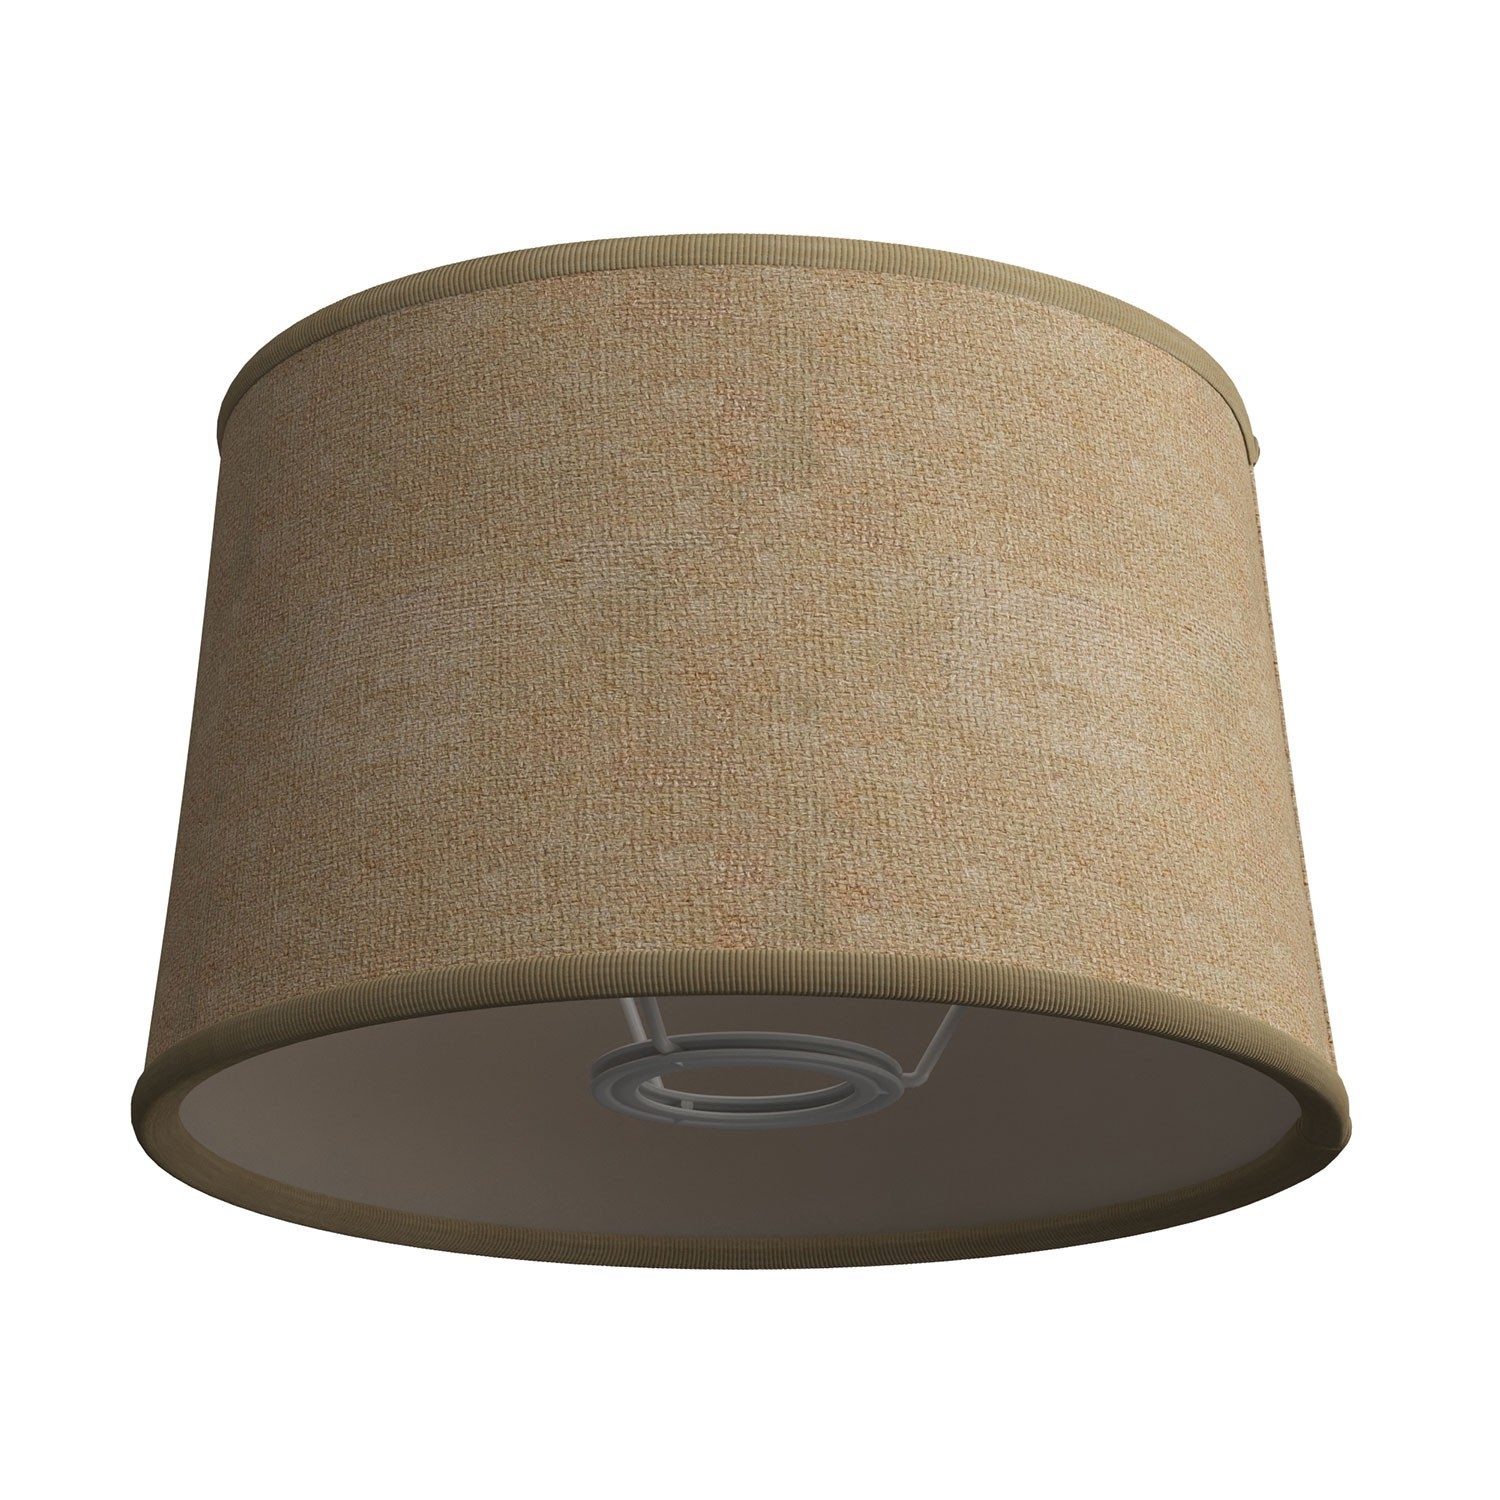 Athena lampshade with socket E26 for table lamp - Made in Italy